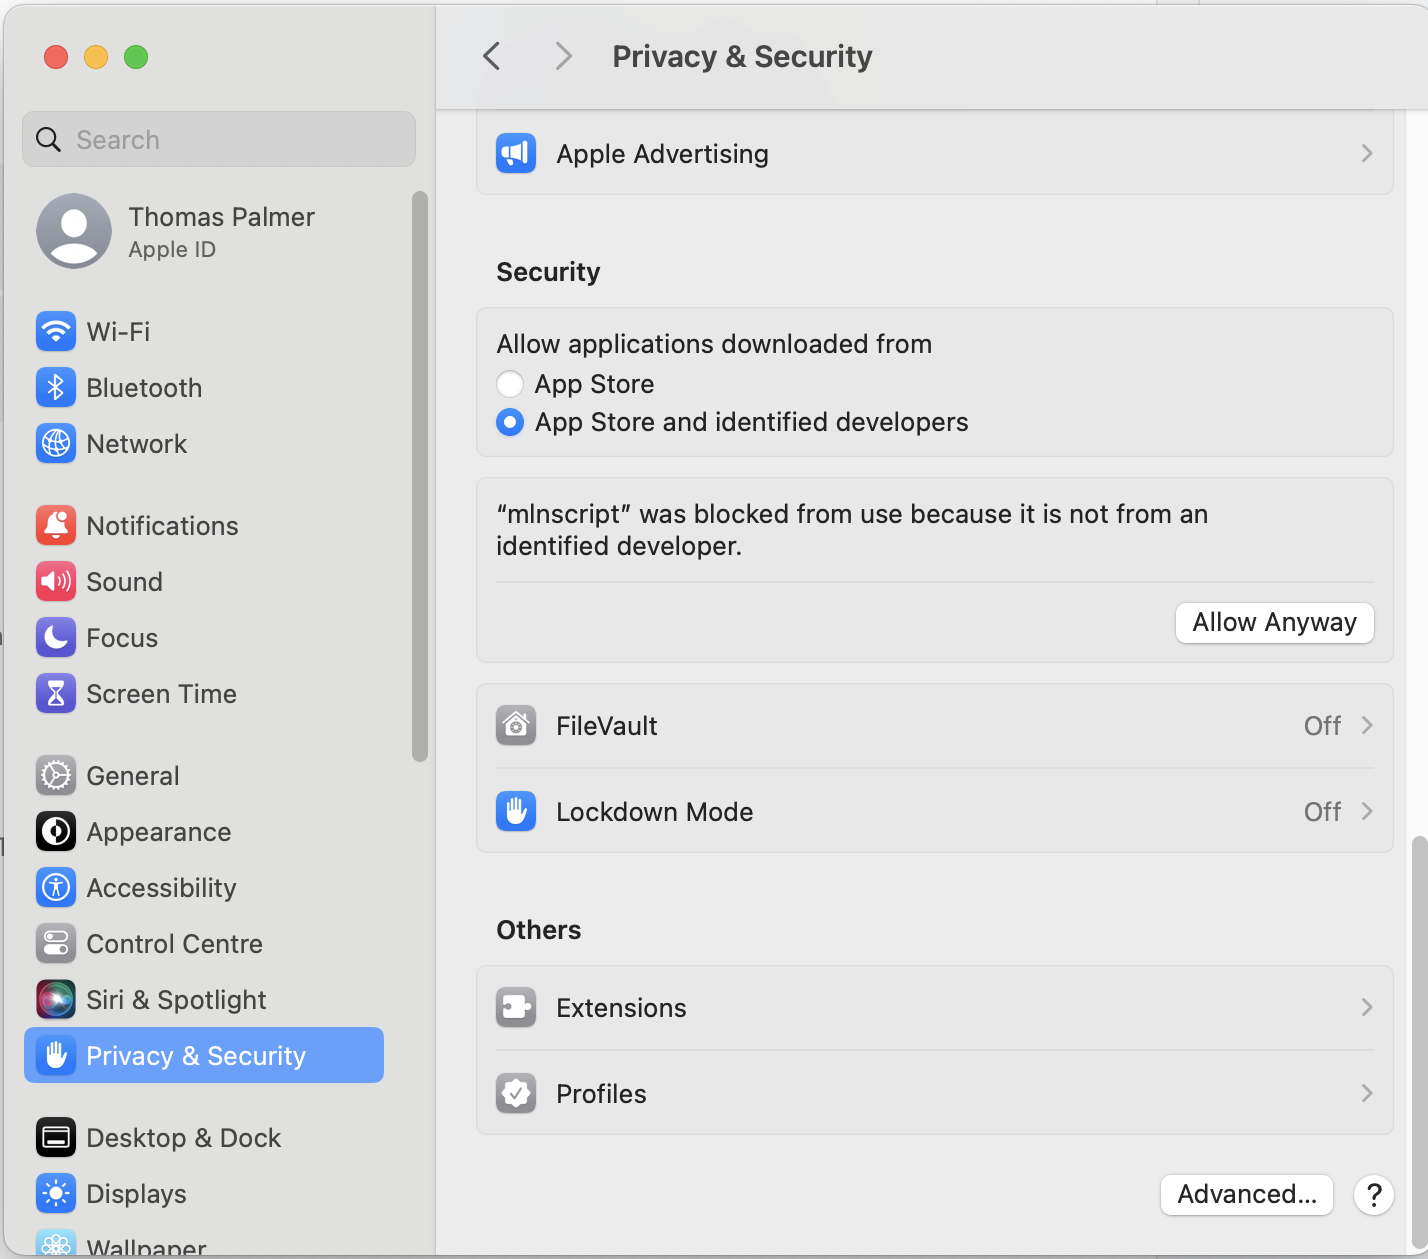 Screenshot of macOS privacy and security setting.